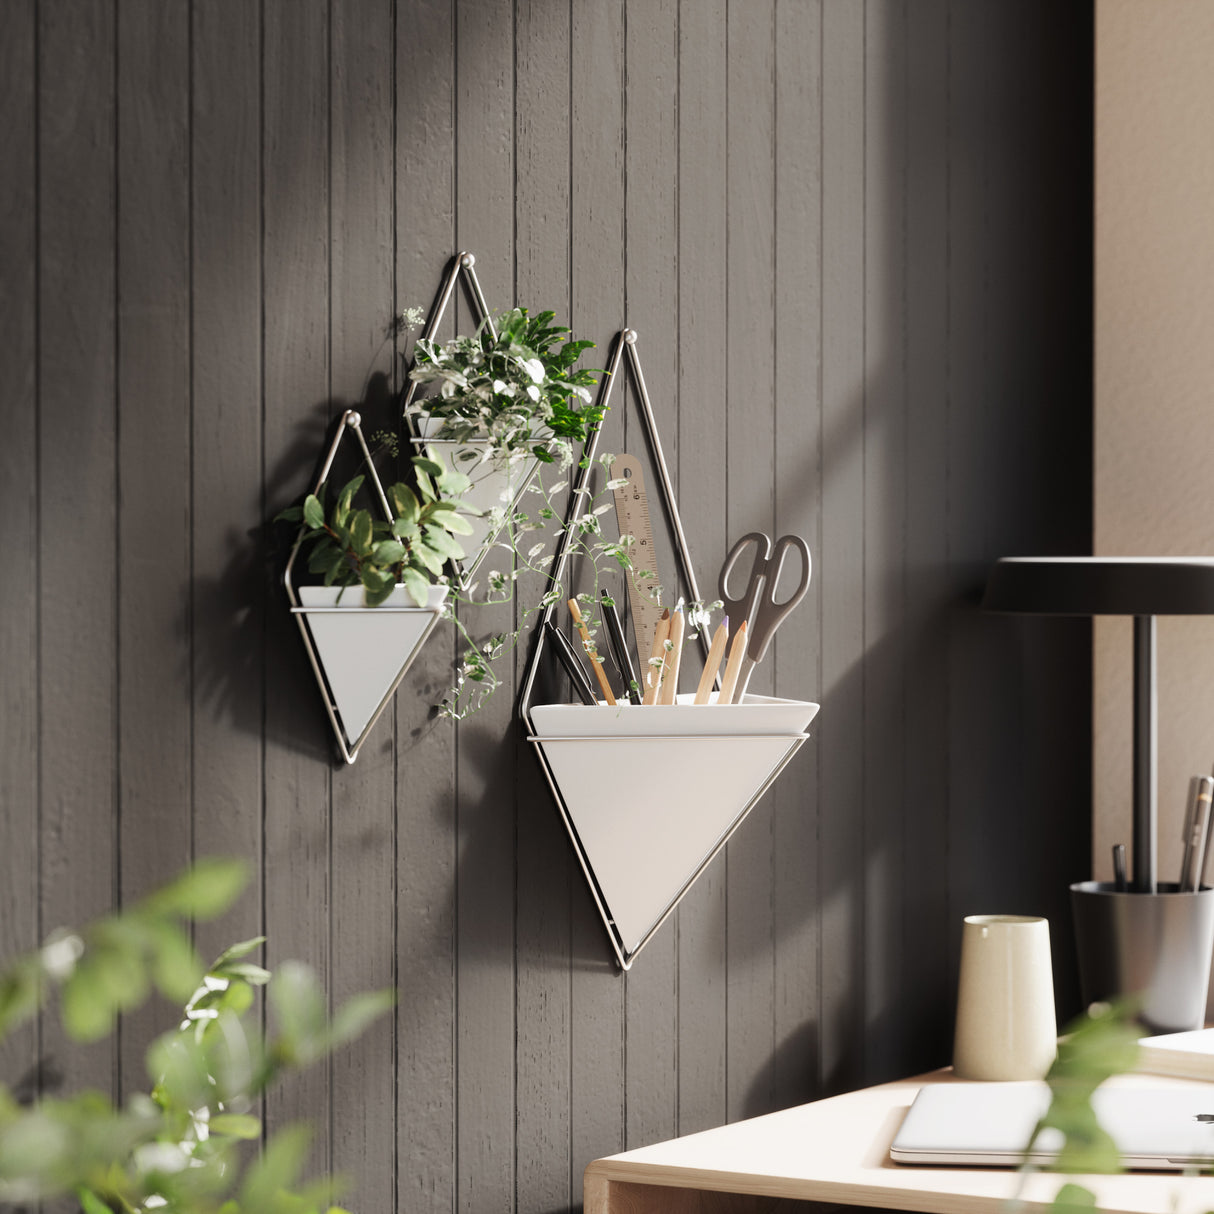 Wall Planters | color: White-Nickel | https://player.vimeo.com/video/176224842